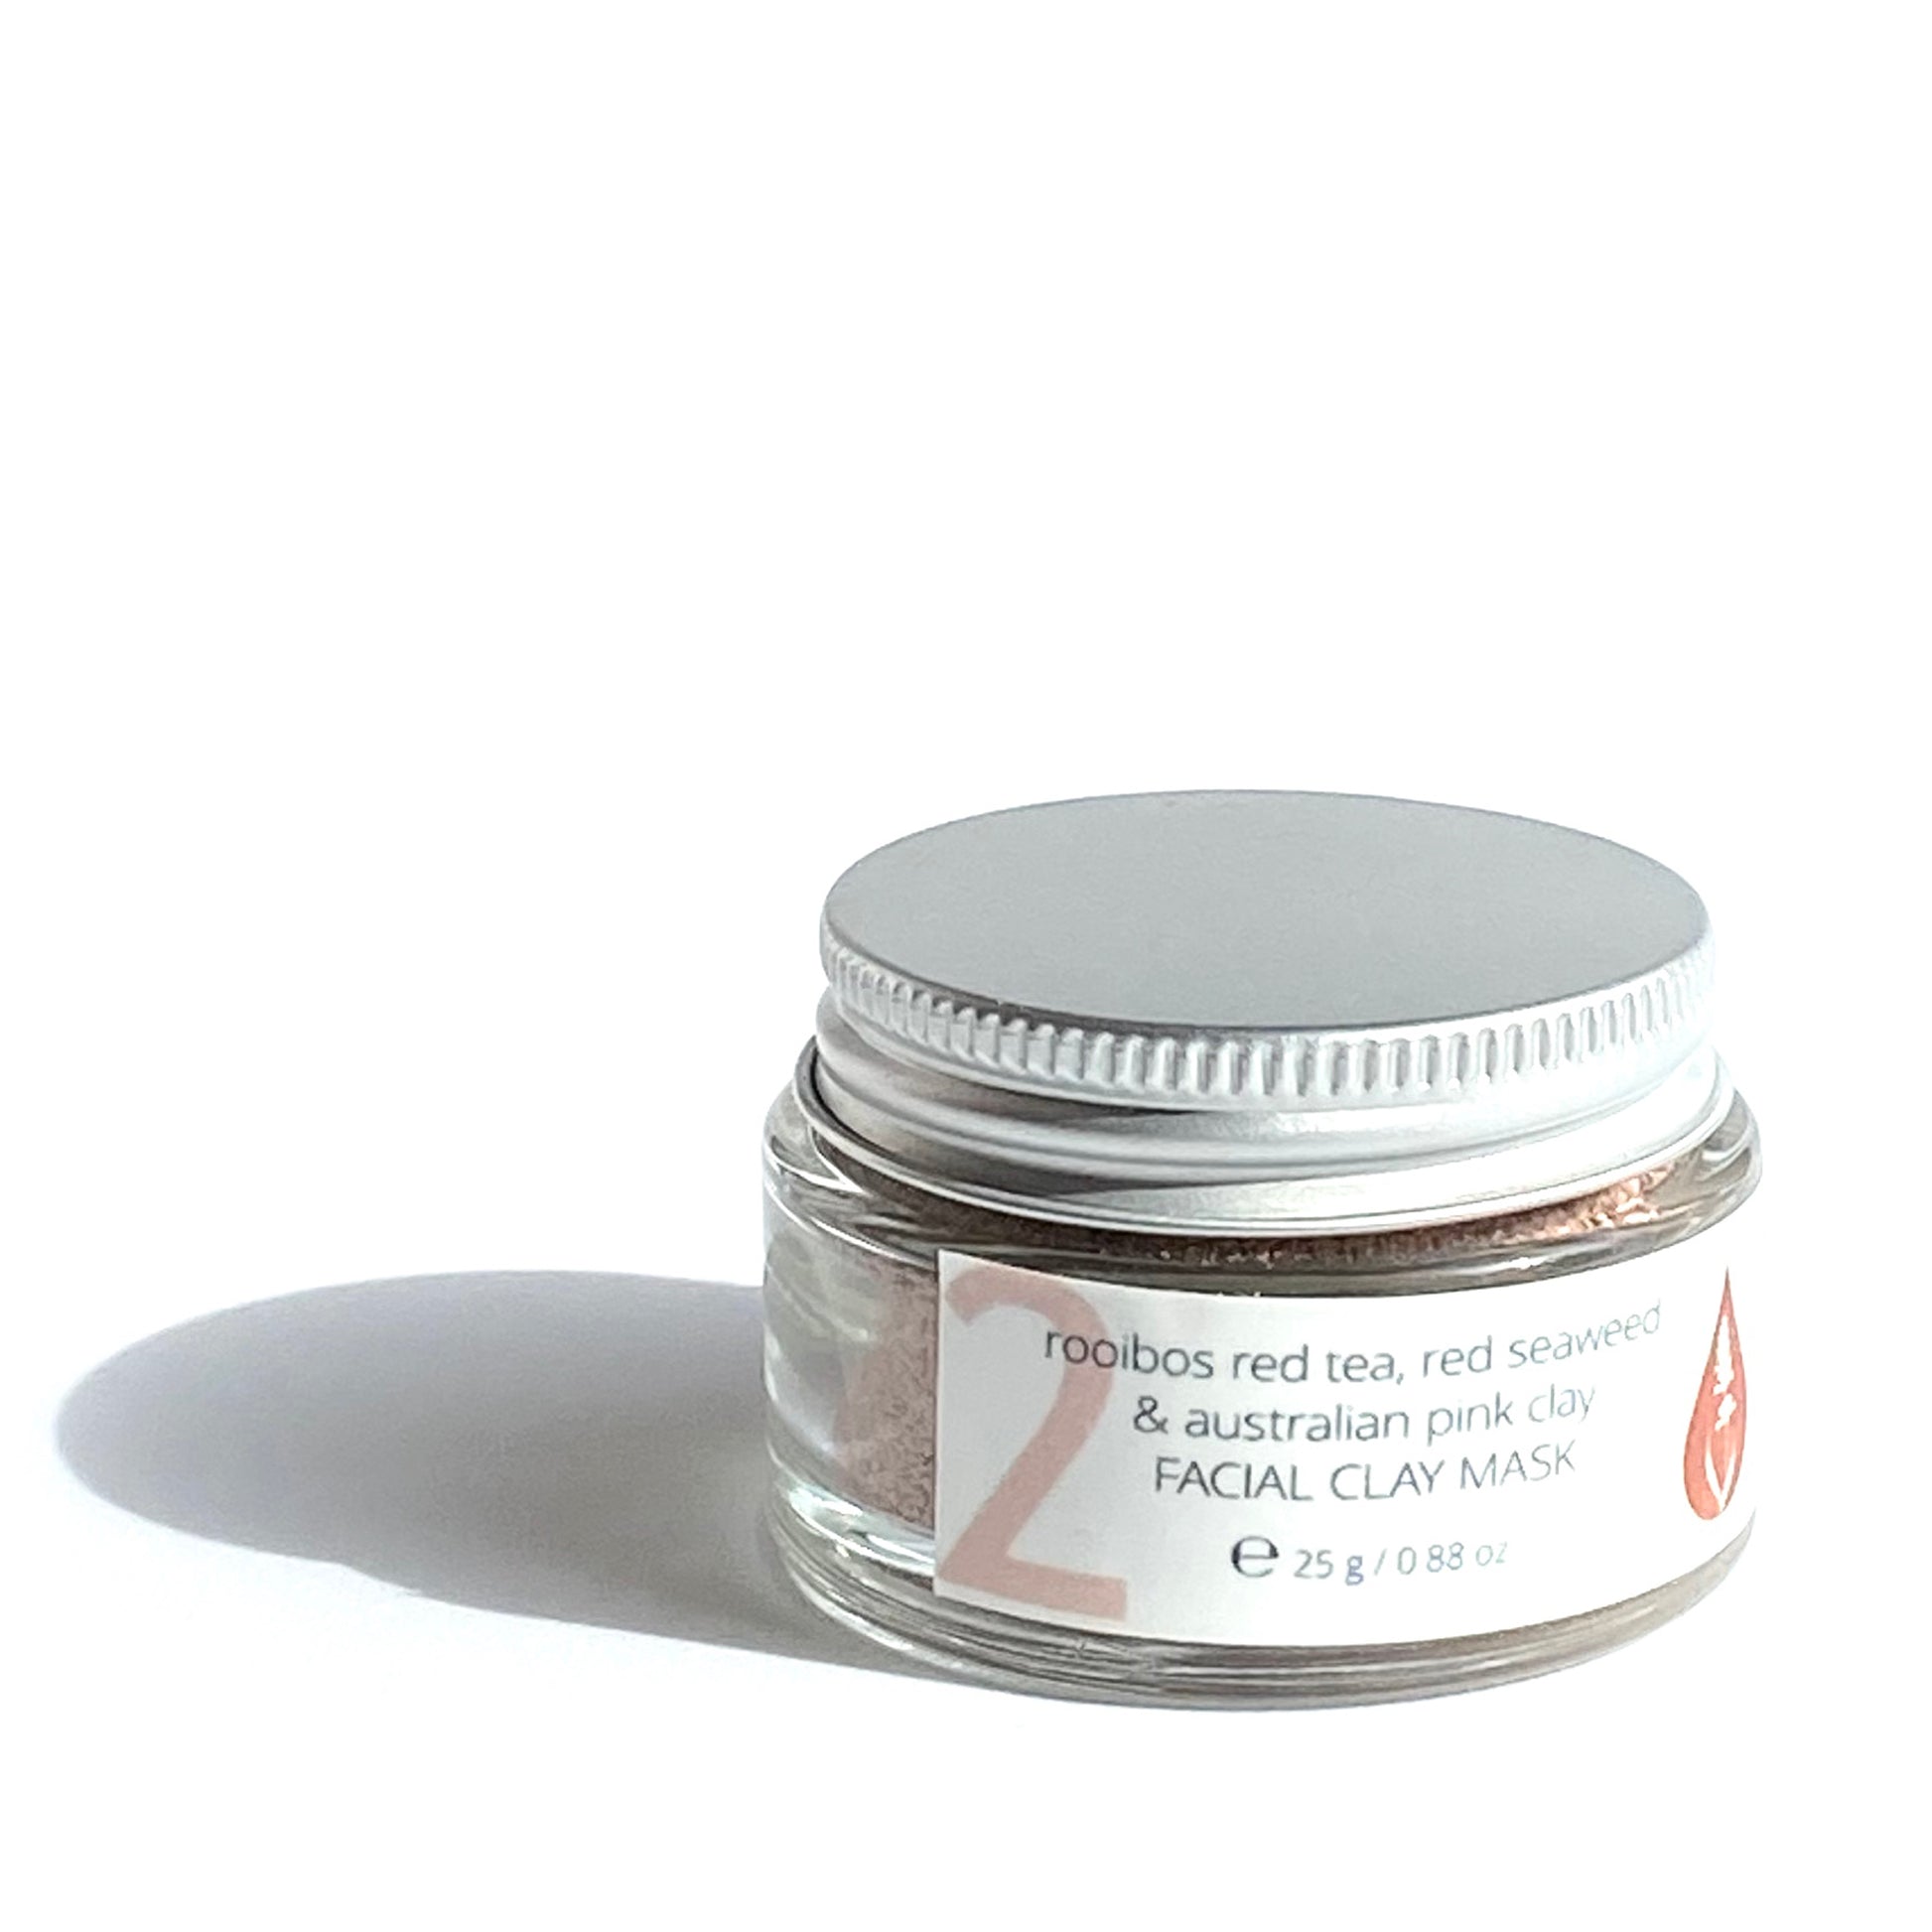 Rooibos Red Tea, Red Seaweed & Australian Pink Clay Beautifying Clay Mask By Valenti Organics Natural Skincare